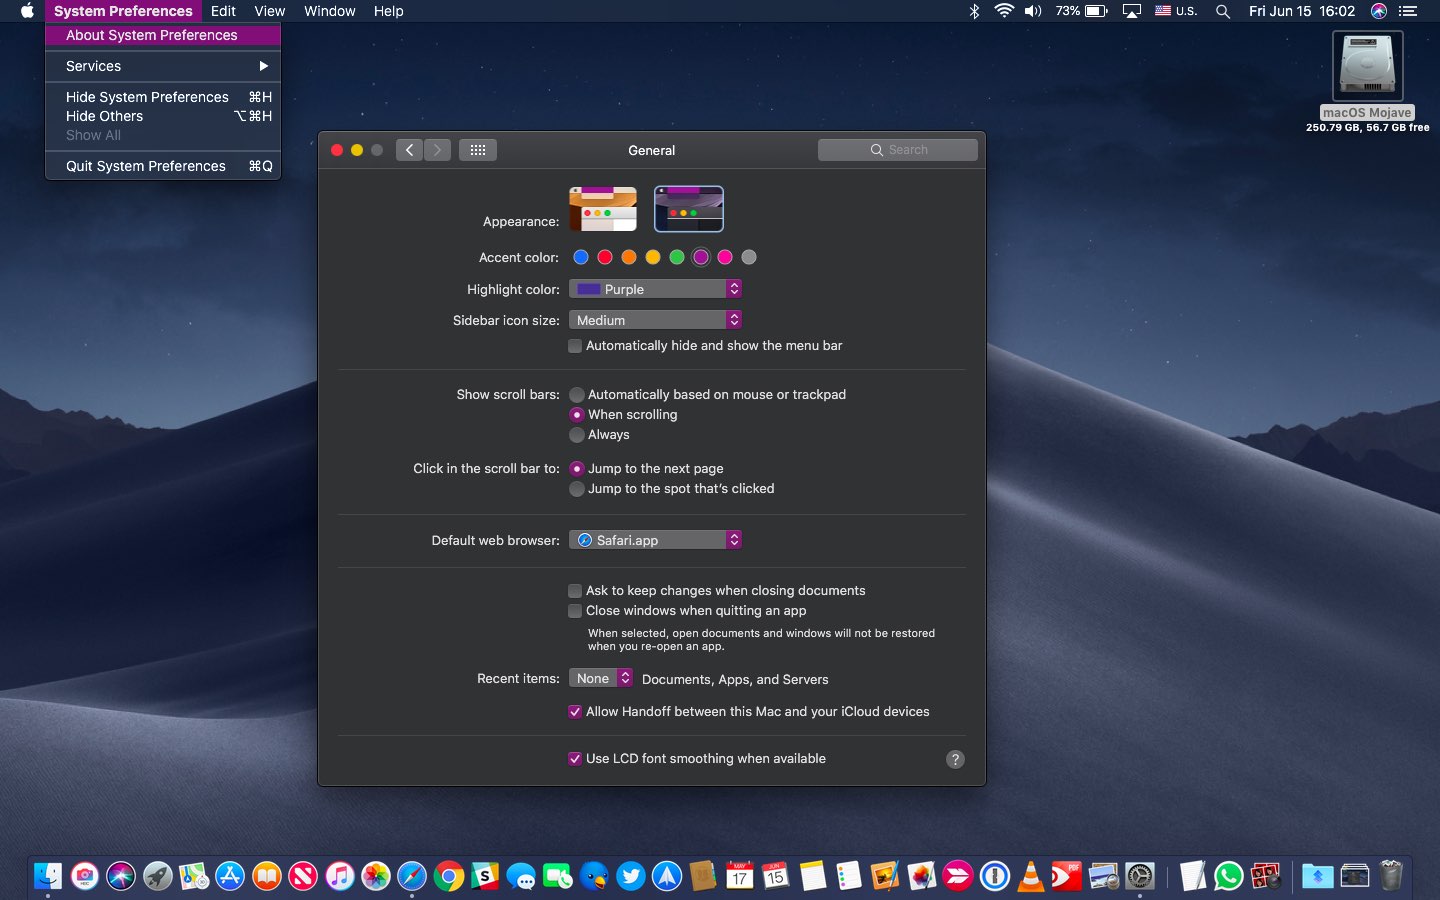 macOS Mojave Dark Mode with the purple accent and highlight color